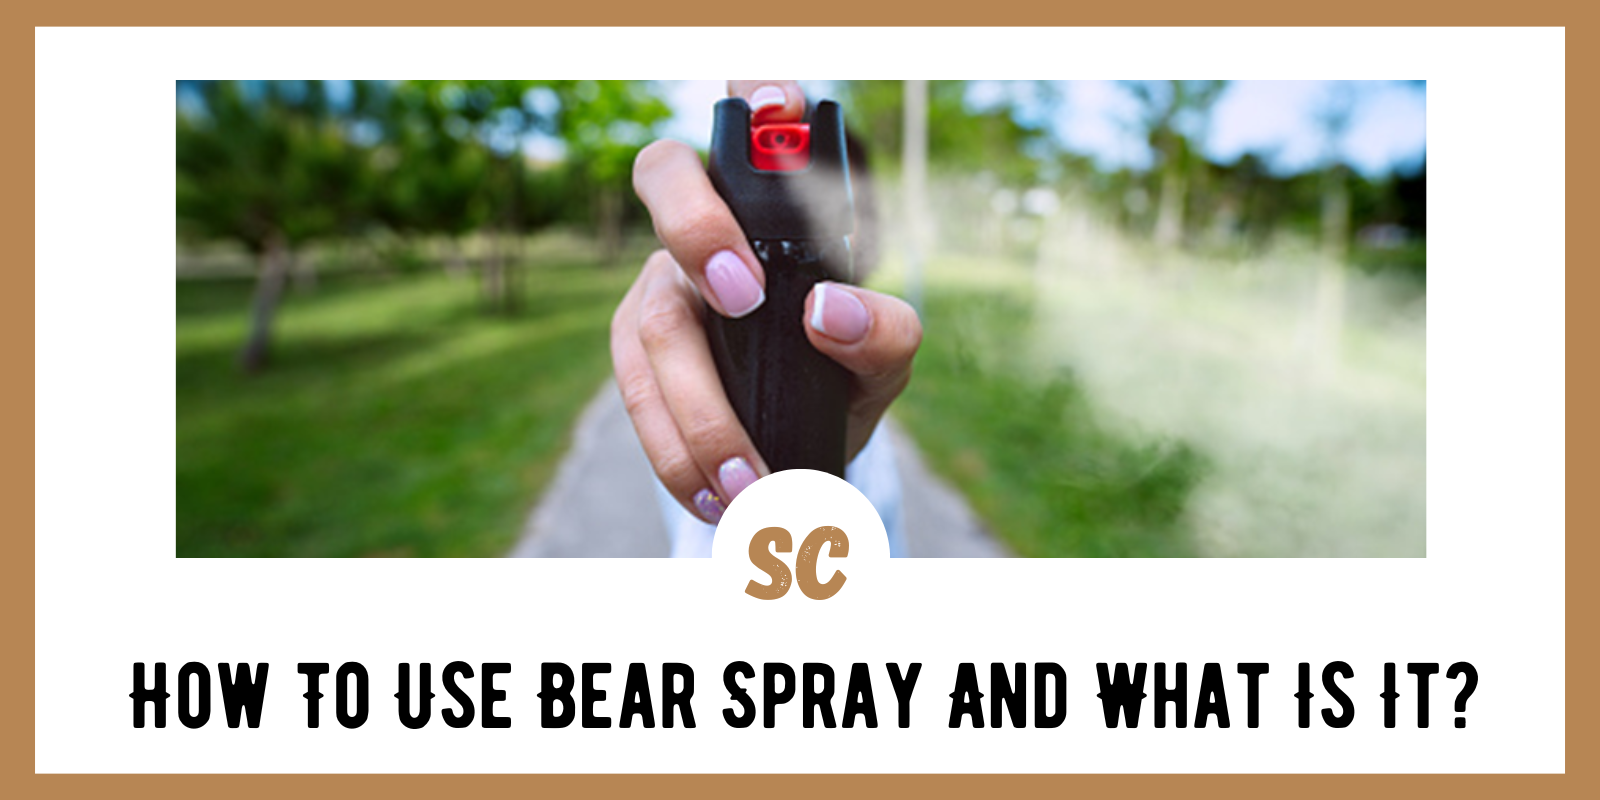 How To Use Bear Spray And What Is It?